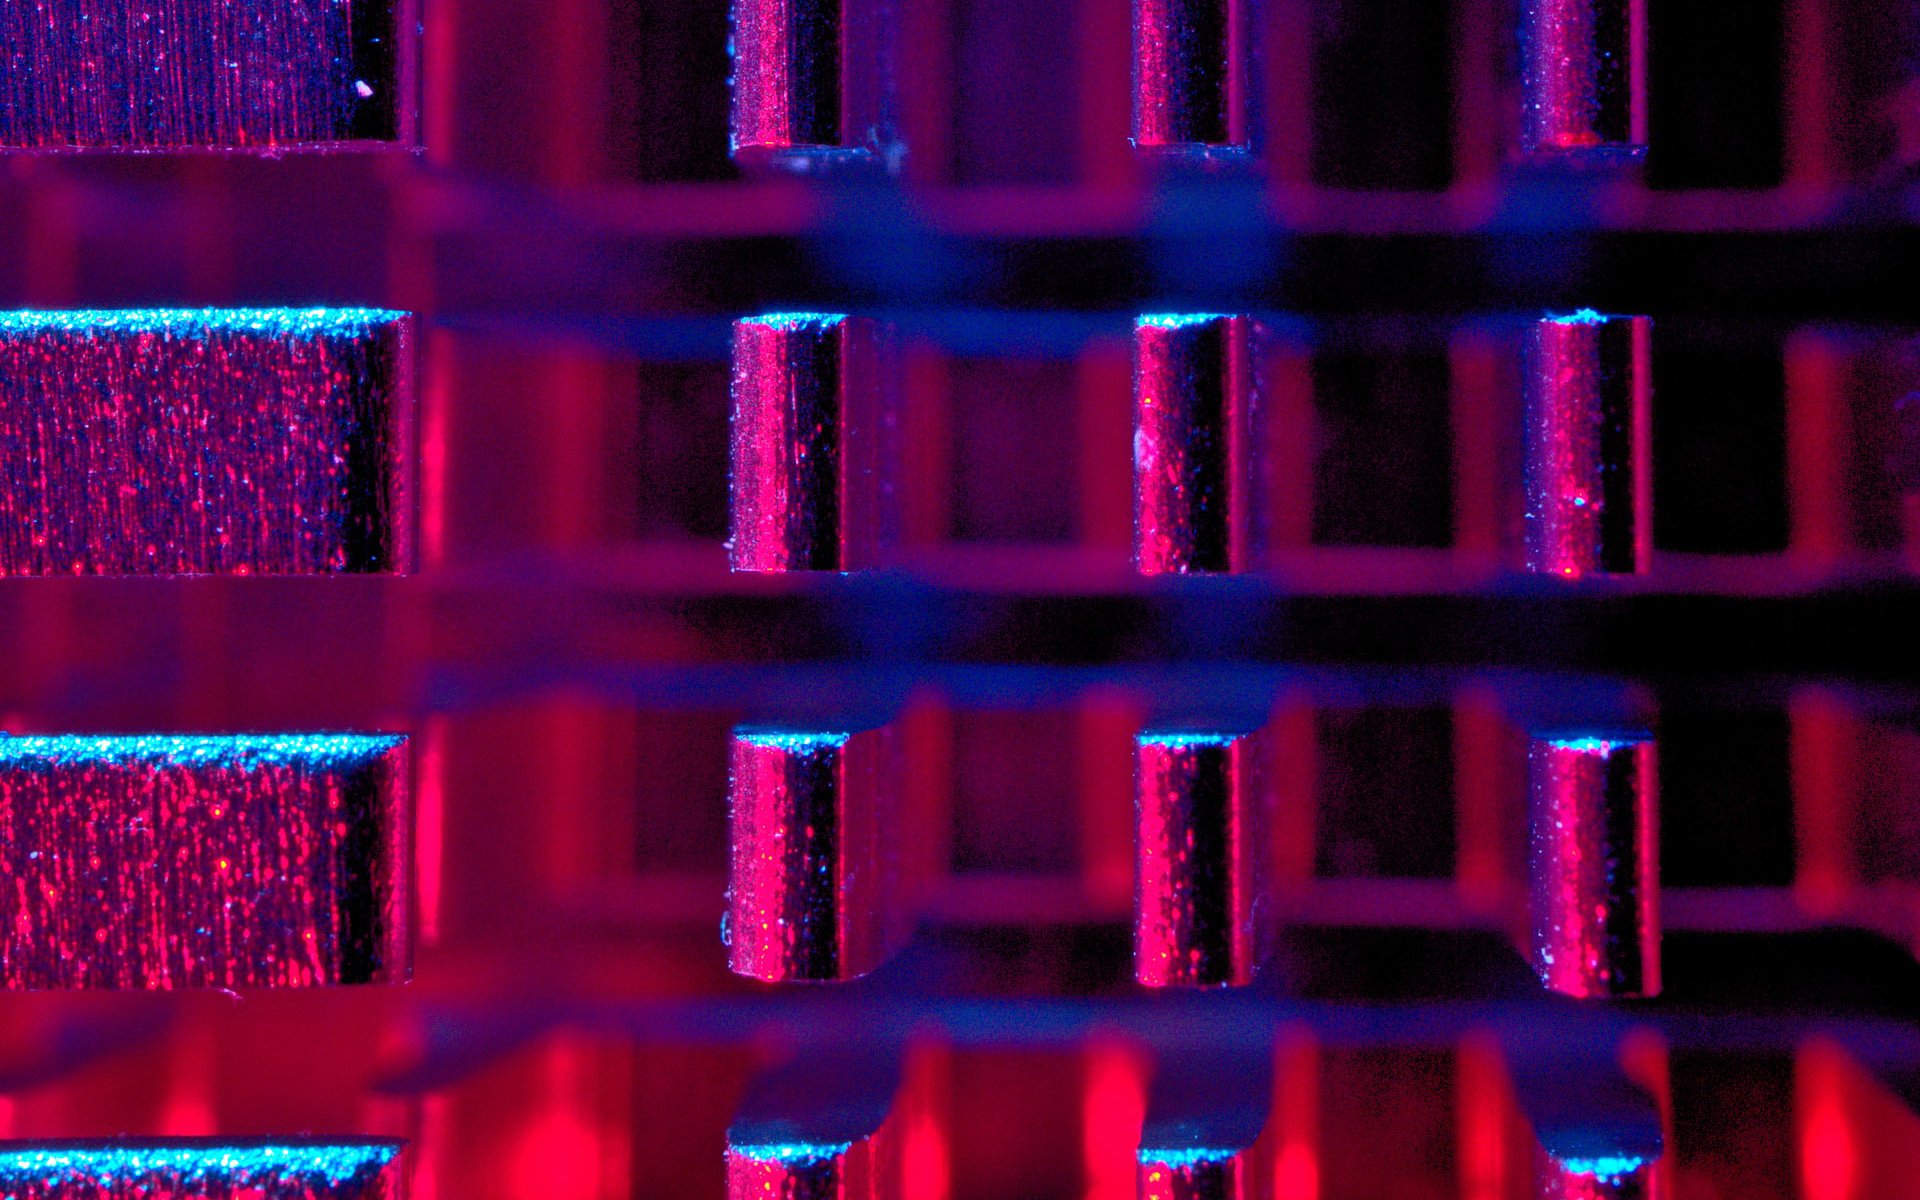 Abstract view of a CPU heatsink